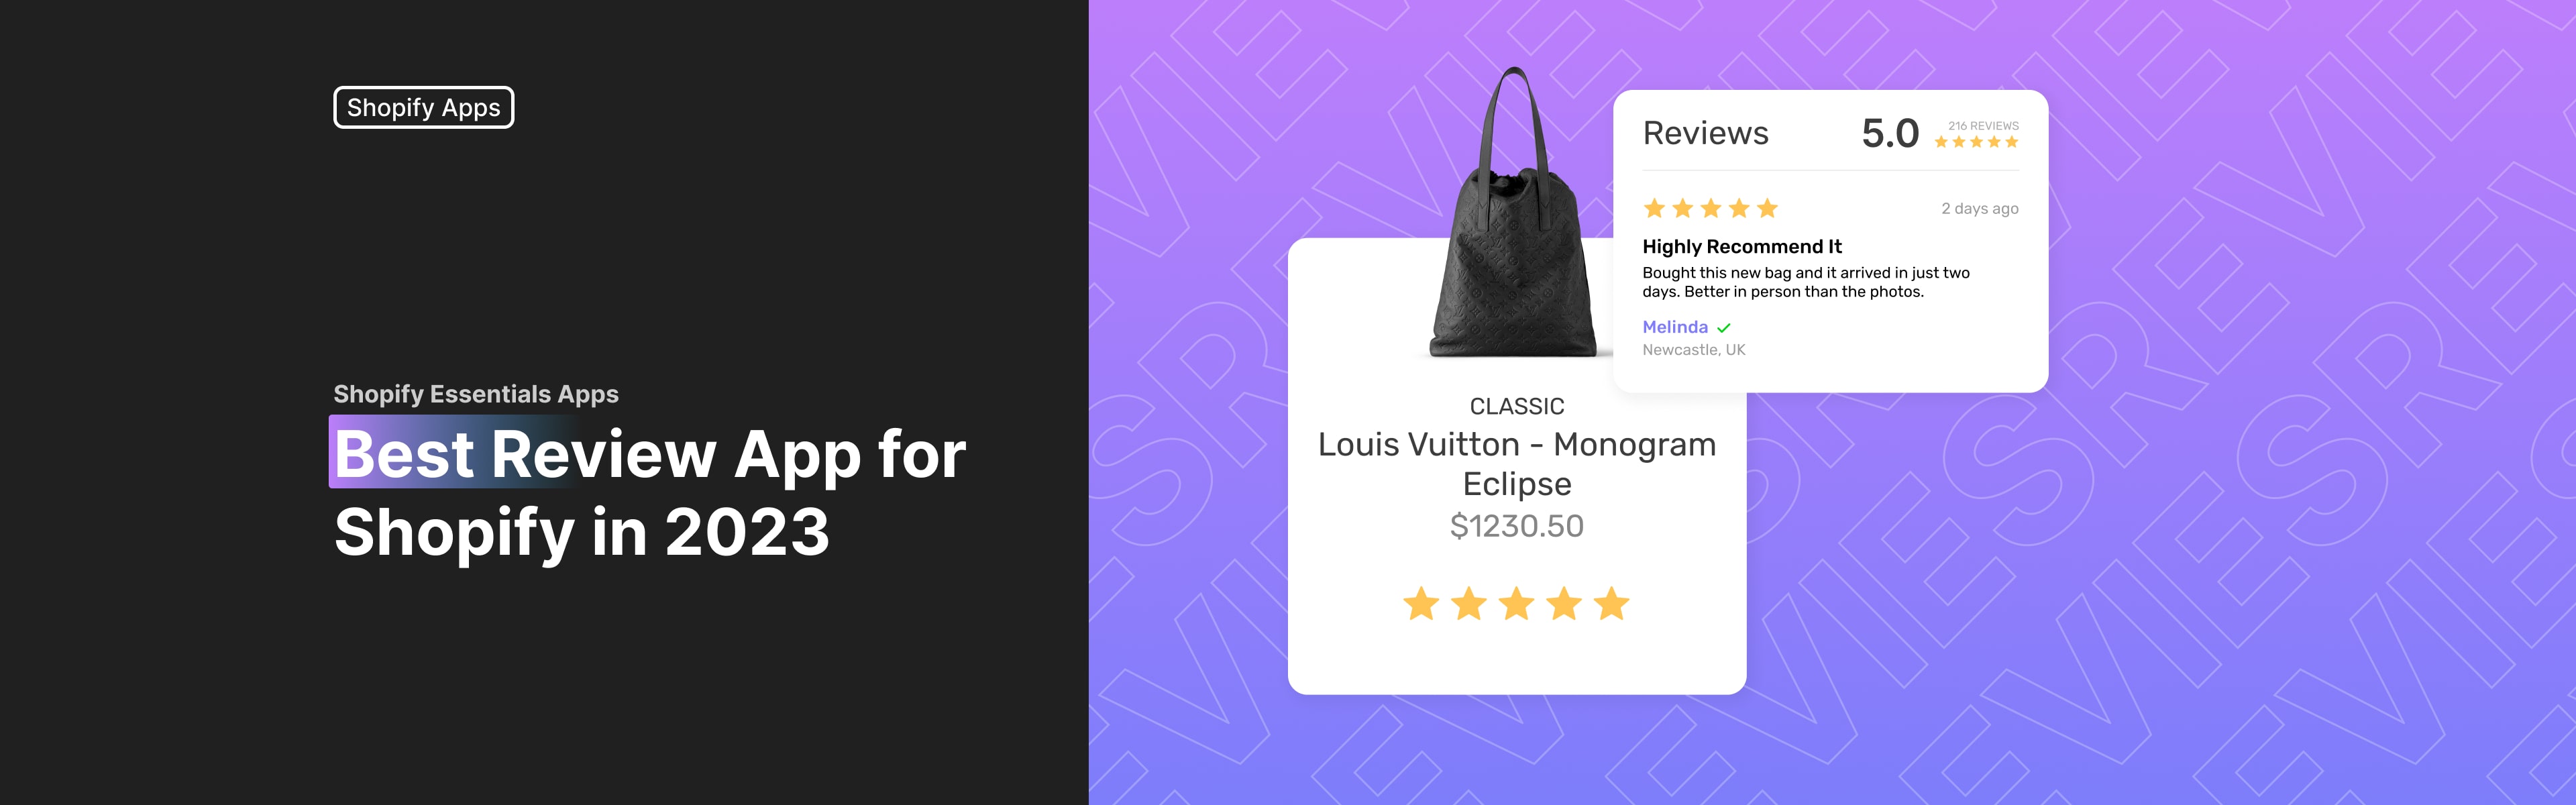 The 10 Best Review Apps for Shopify That Will Boost Your Conversion in 2023